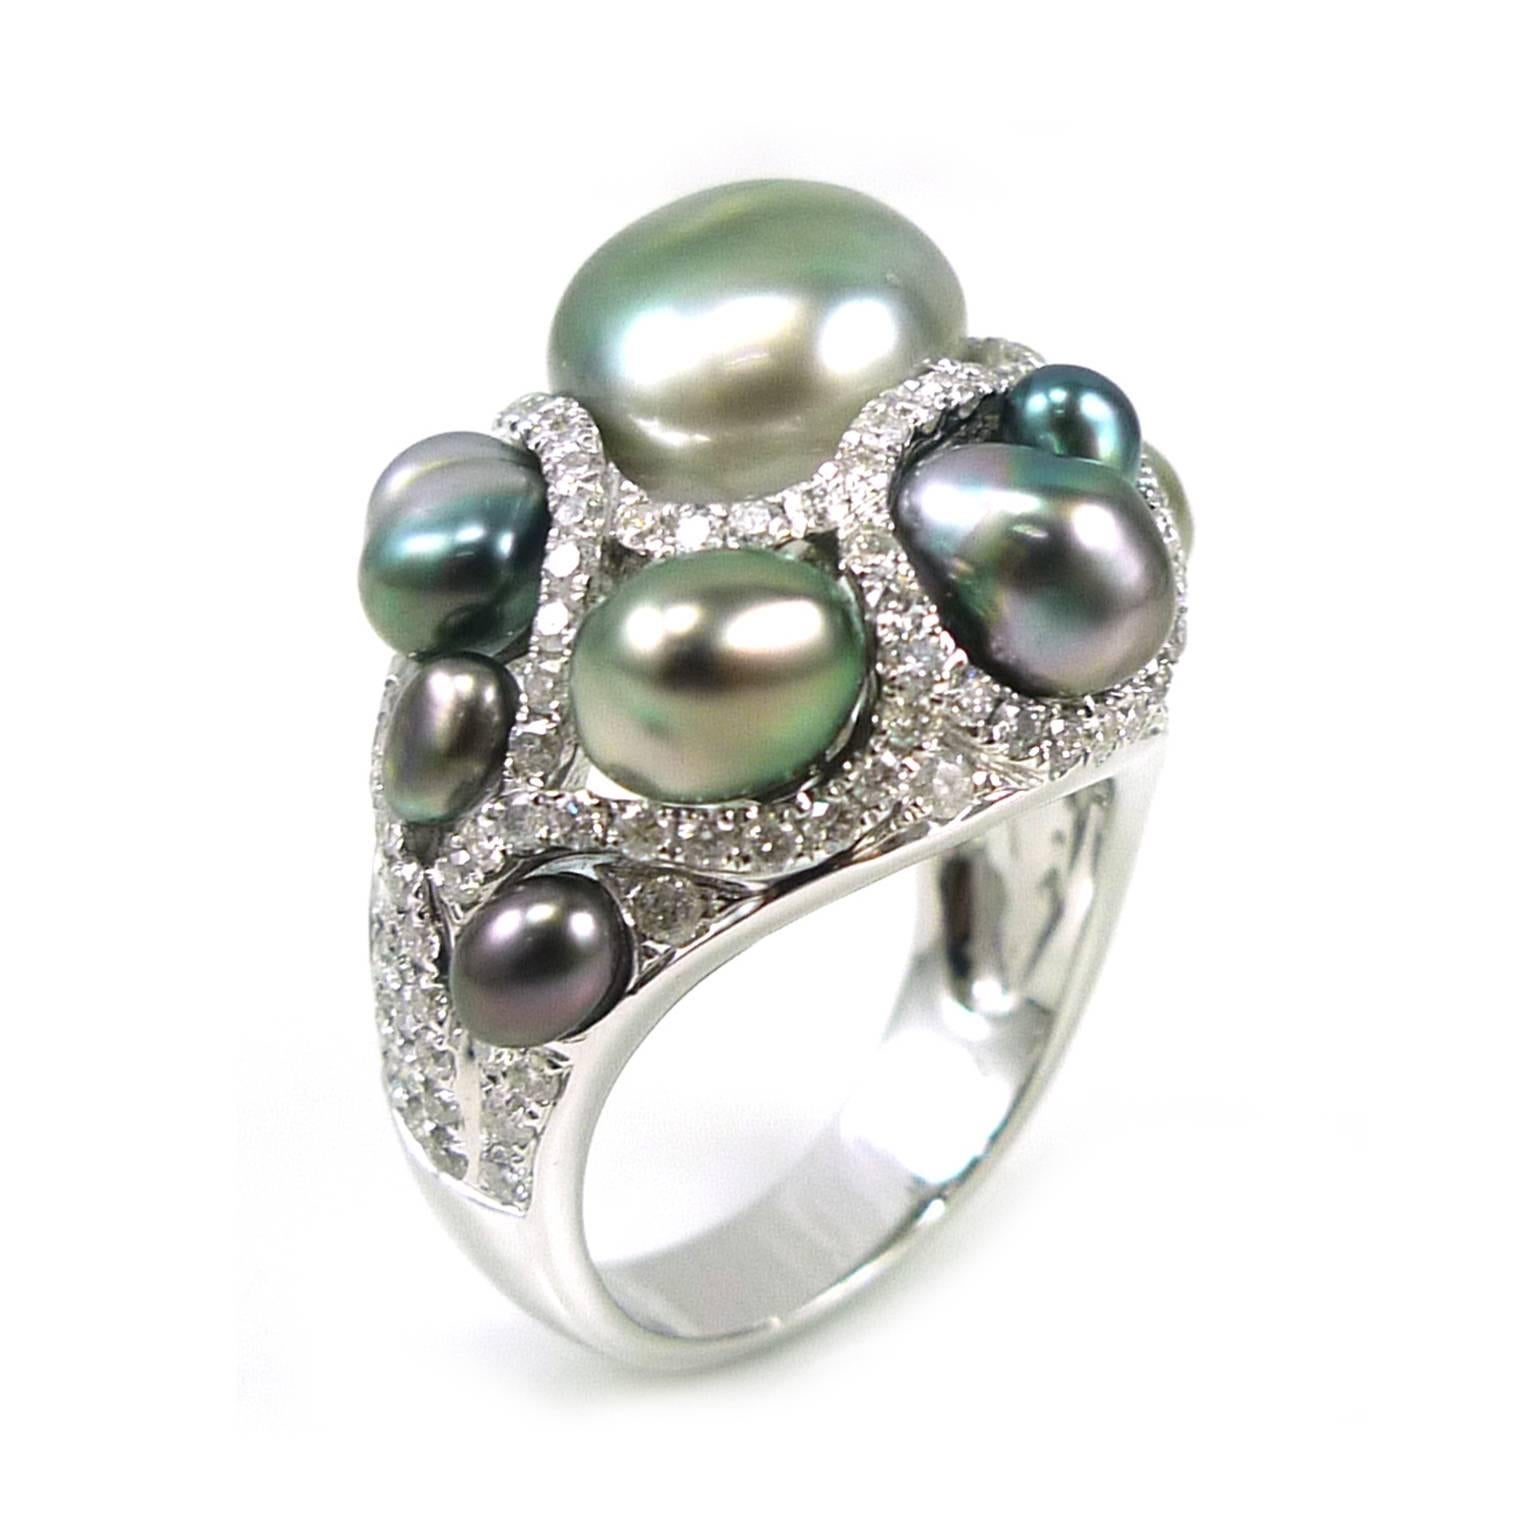 This ring is for those pearl collectors out there that are looking for something unique and different!  There are 9 grey pearls clustered on top with what looks like a river of white diamonds flowing in between each pearl.  This is a size 7, please